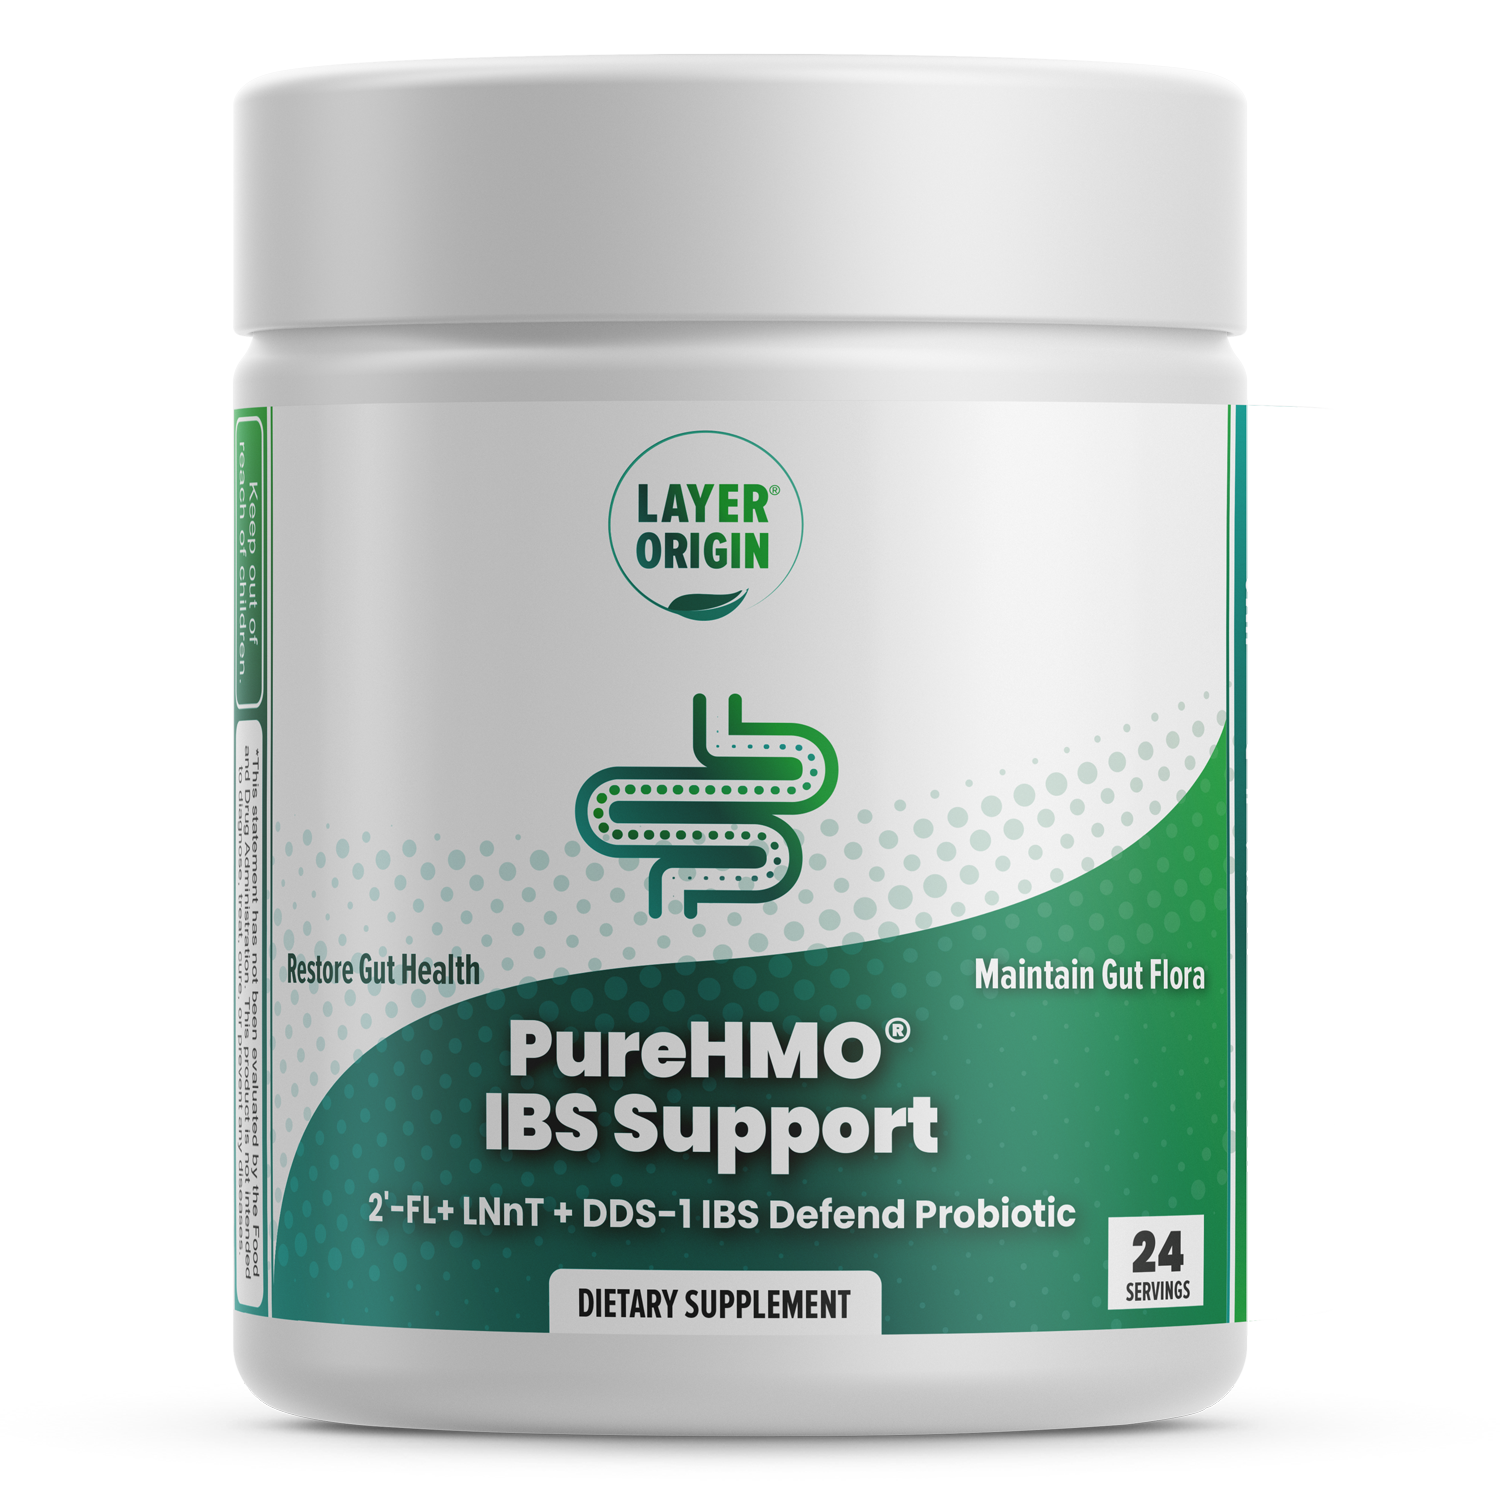 HMO for IBS